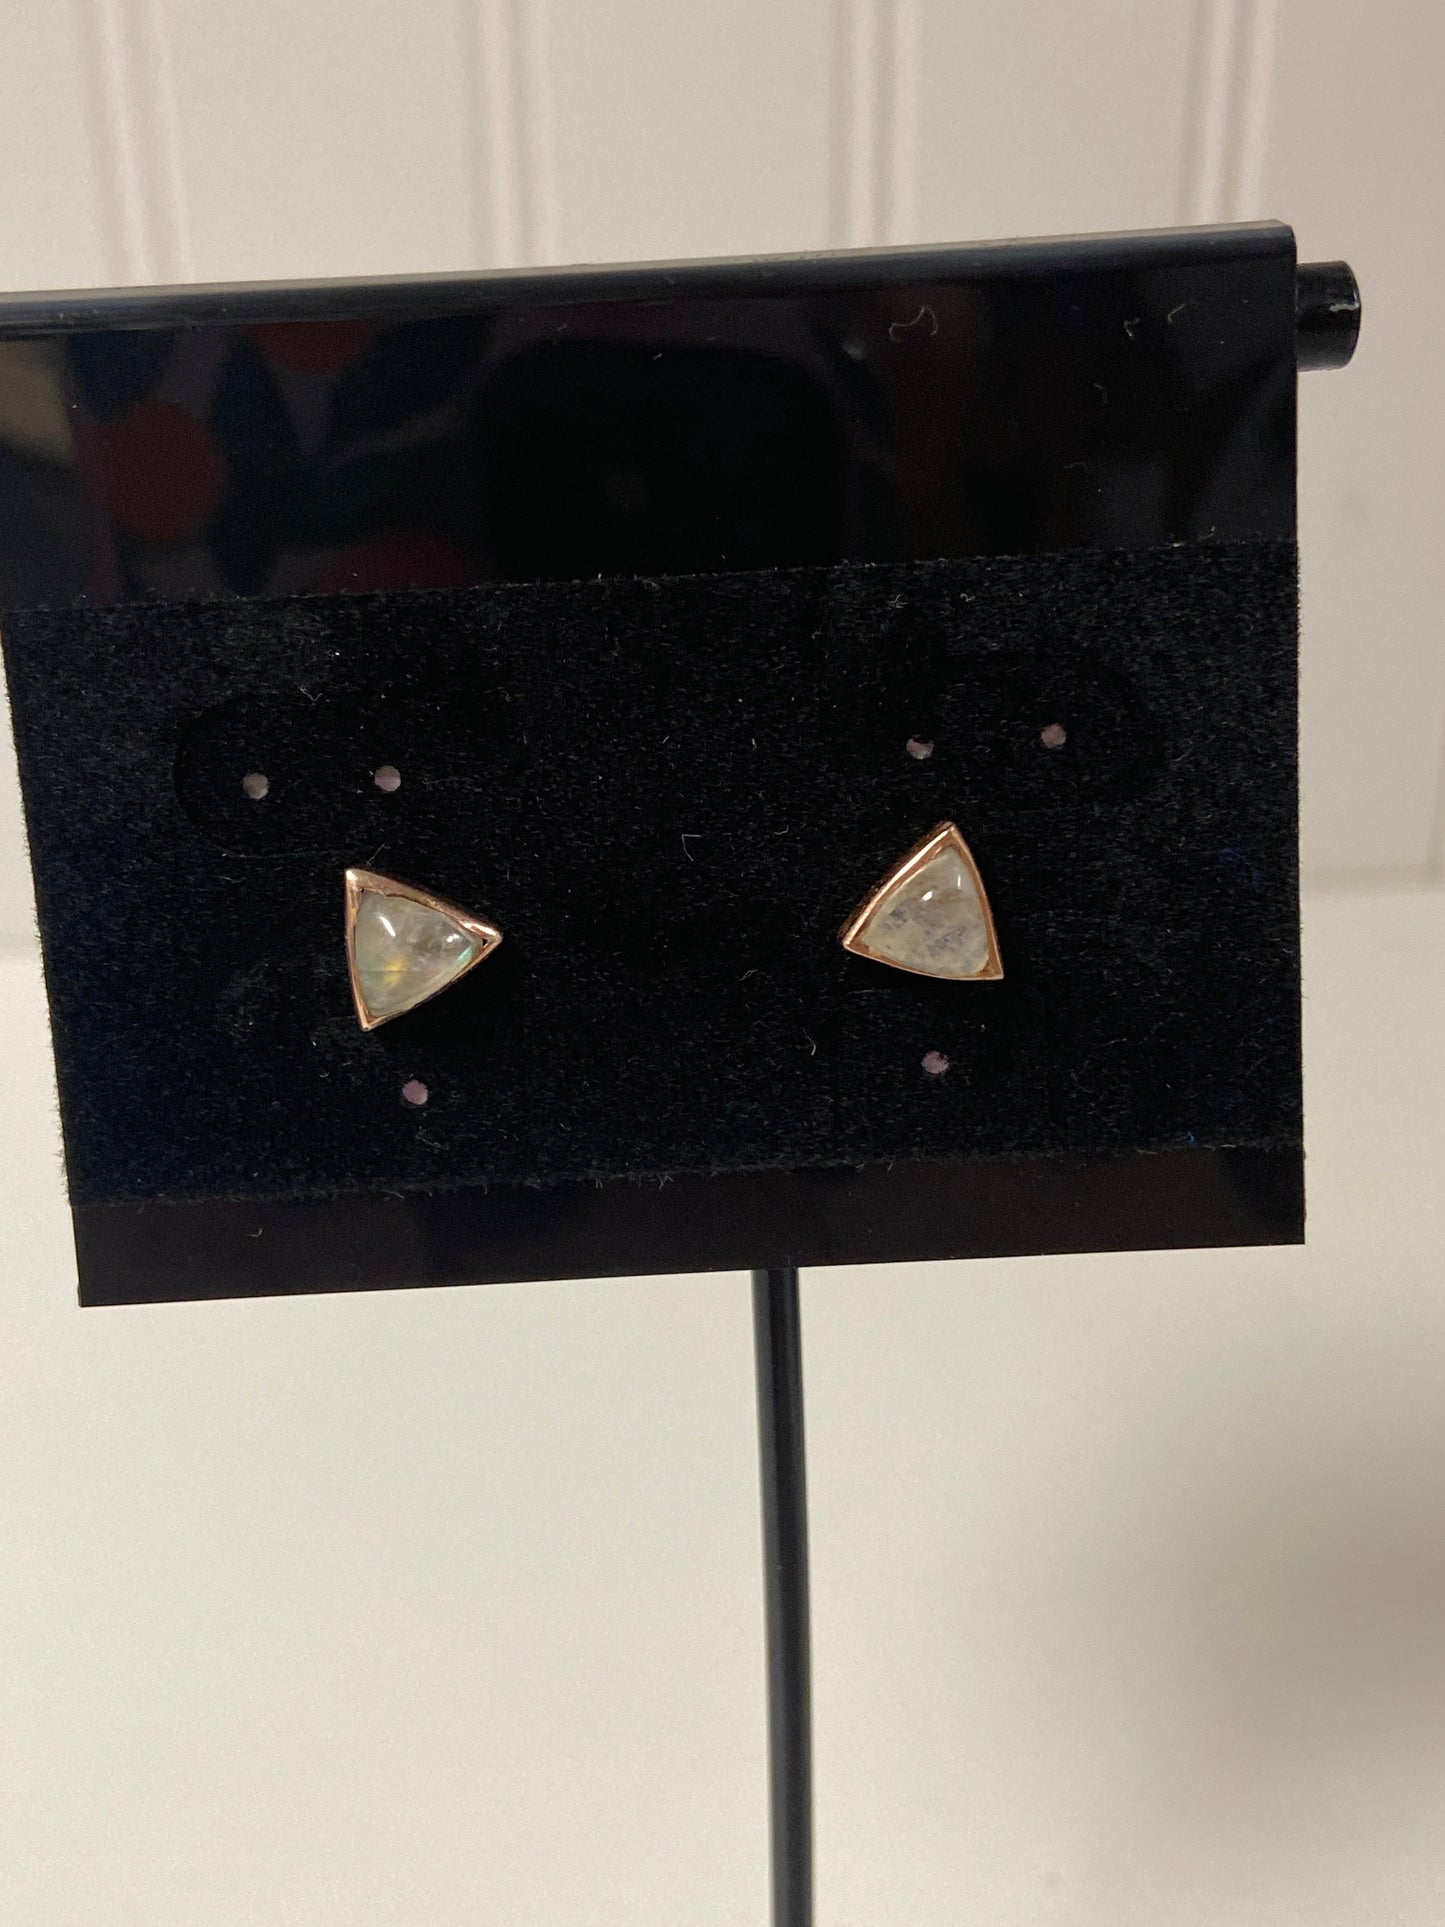 Earrings Stud Clothes Mentor